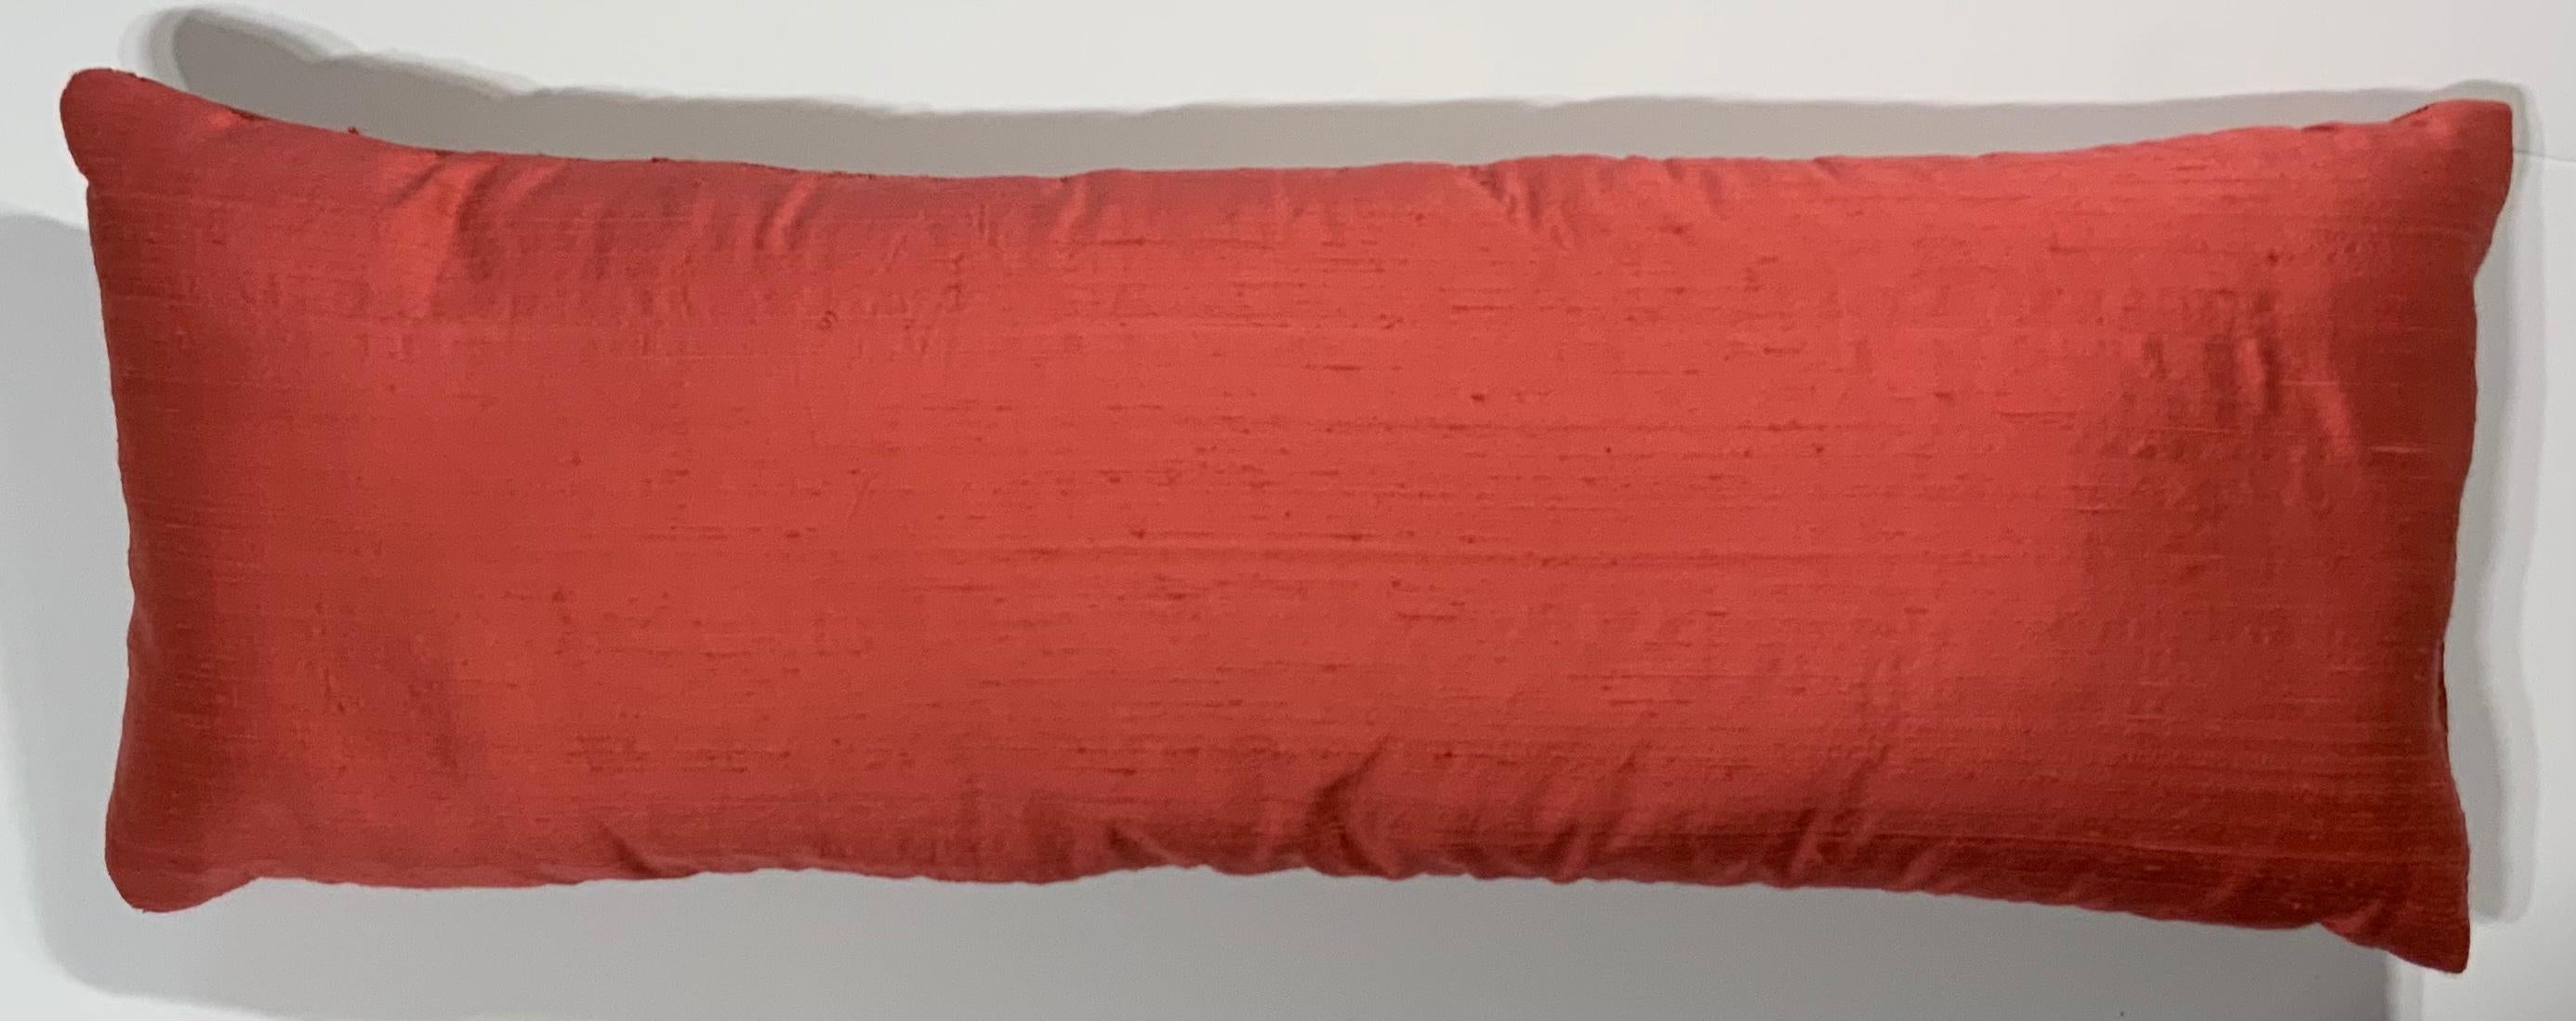 Single Cactus Silk Red Pillow In Good Condition For Sale In Delray Beach, FL